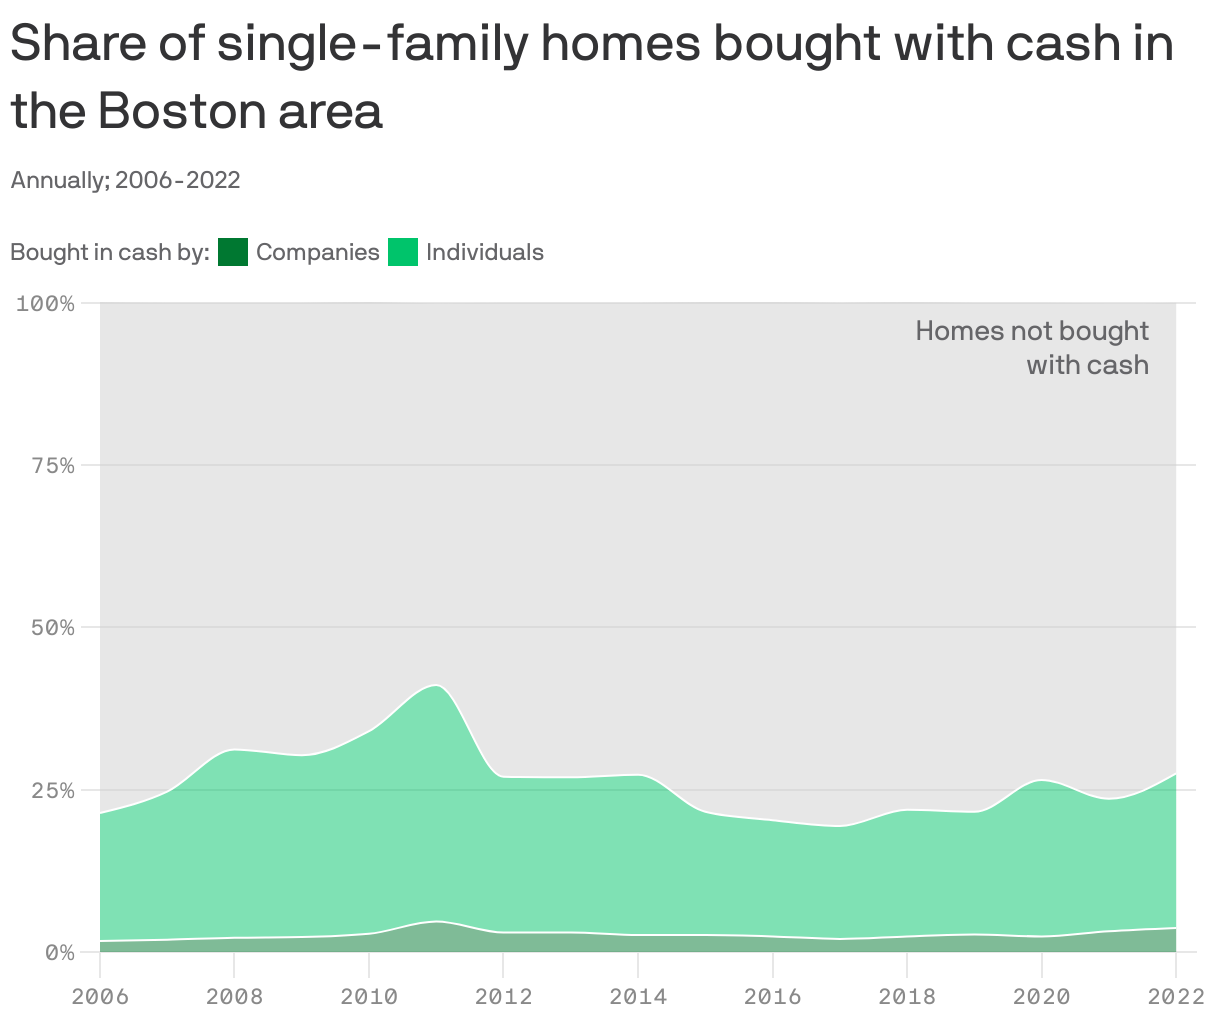 Share of single-family homes bought with cash in the Boston area